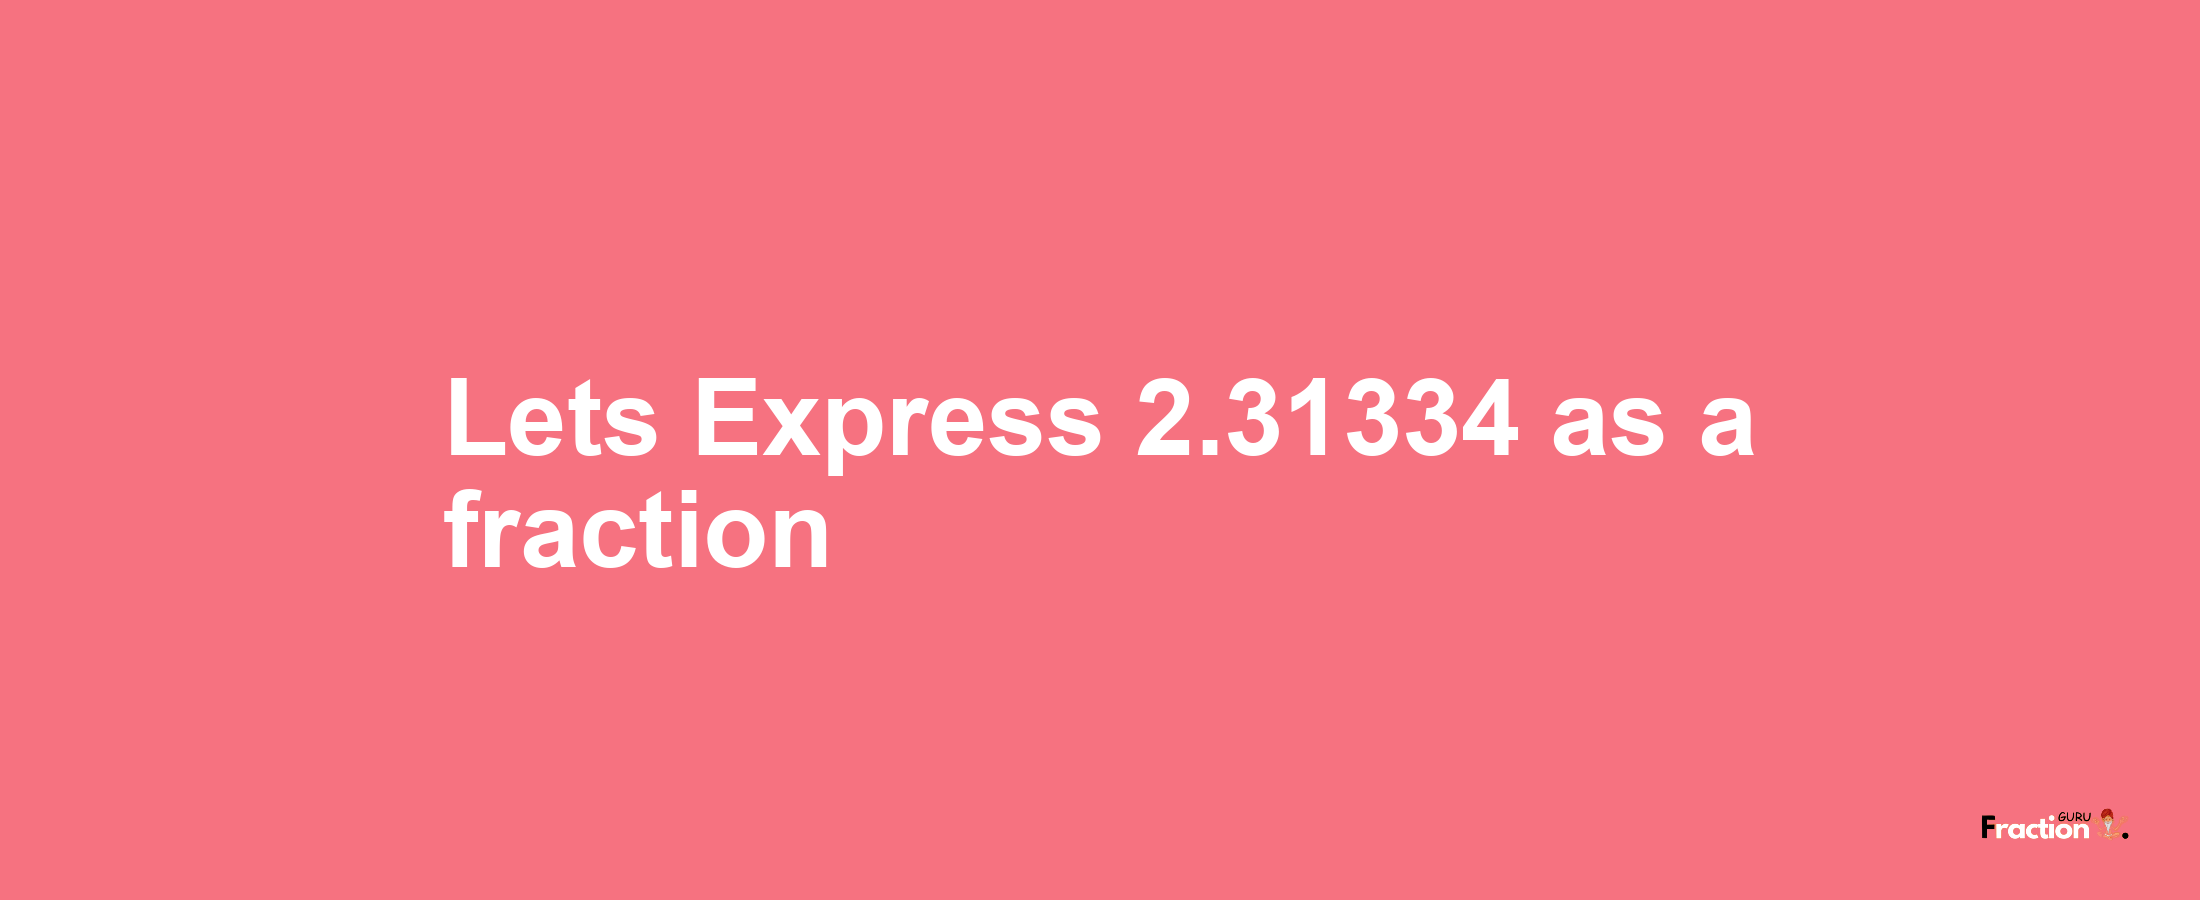 Lets Express 2.31334 as afraction